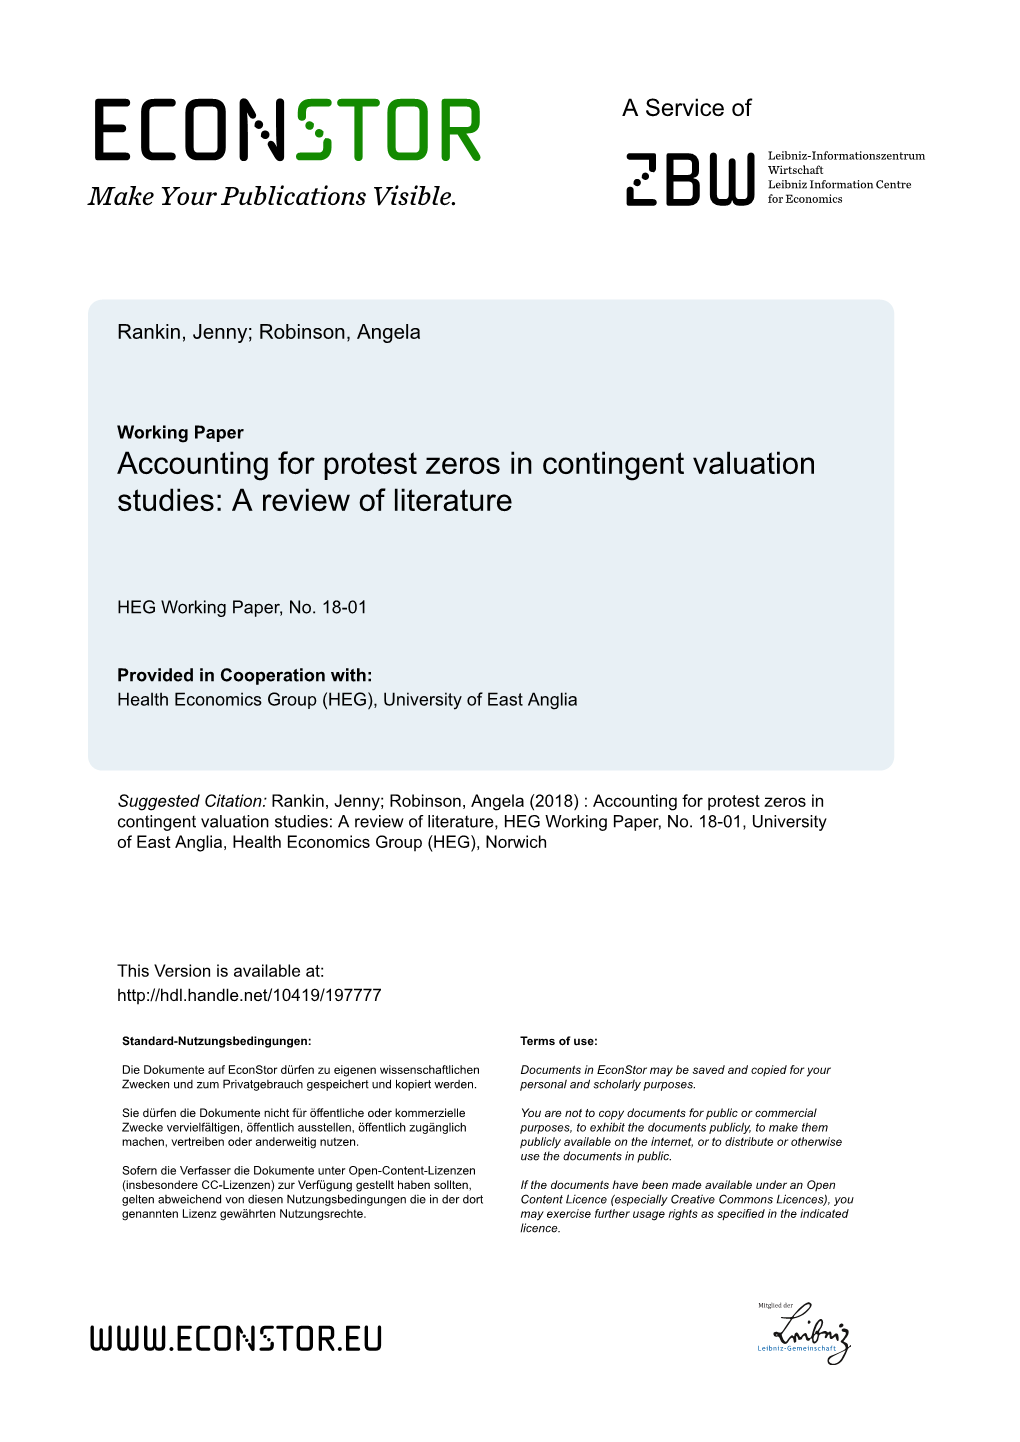 Accounting for Protest Zeros in Contingent Valuation Studies: a Review of Literature